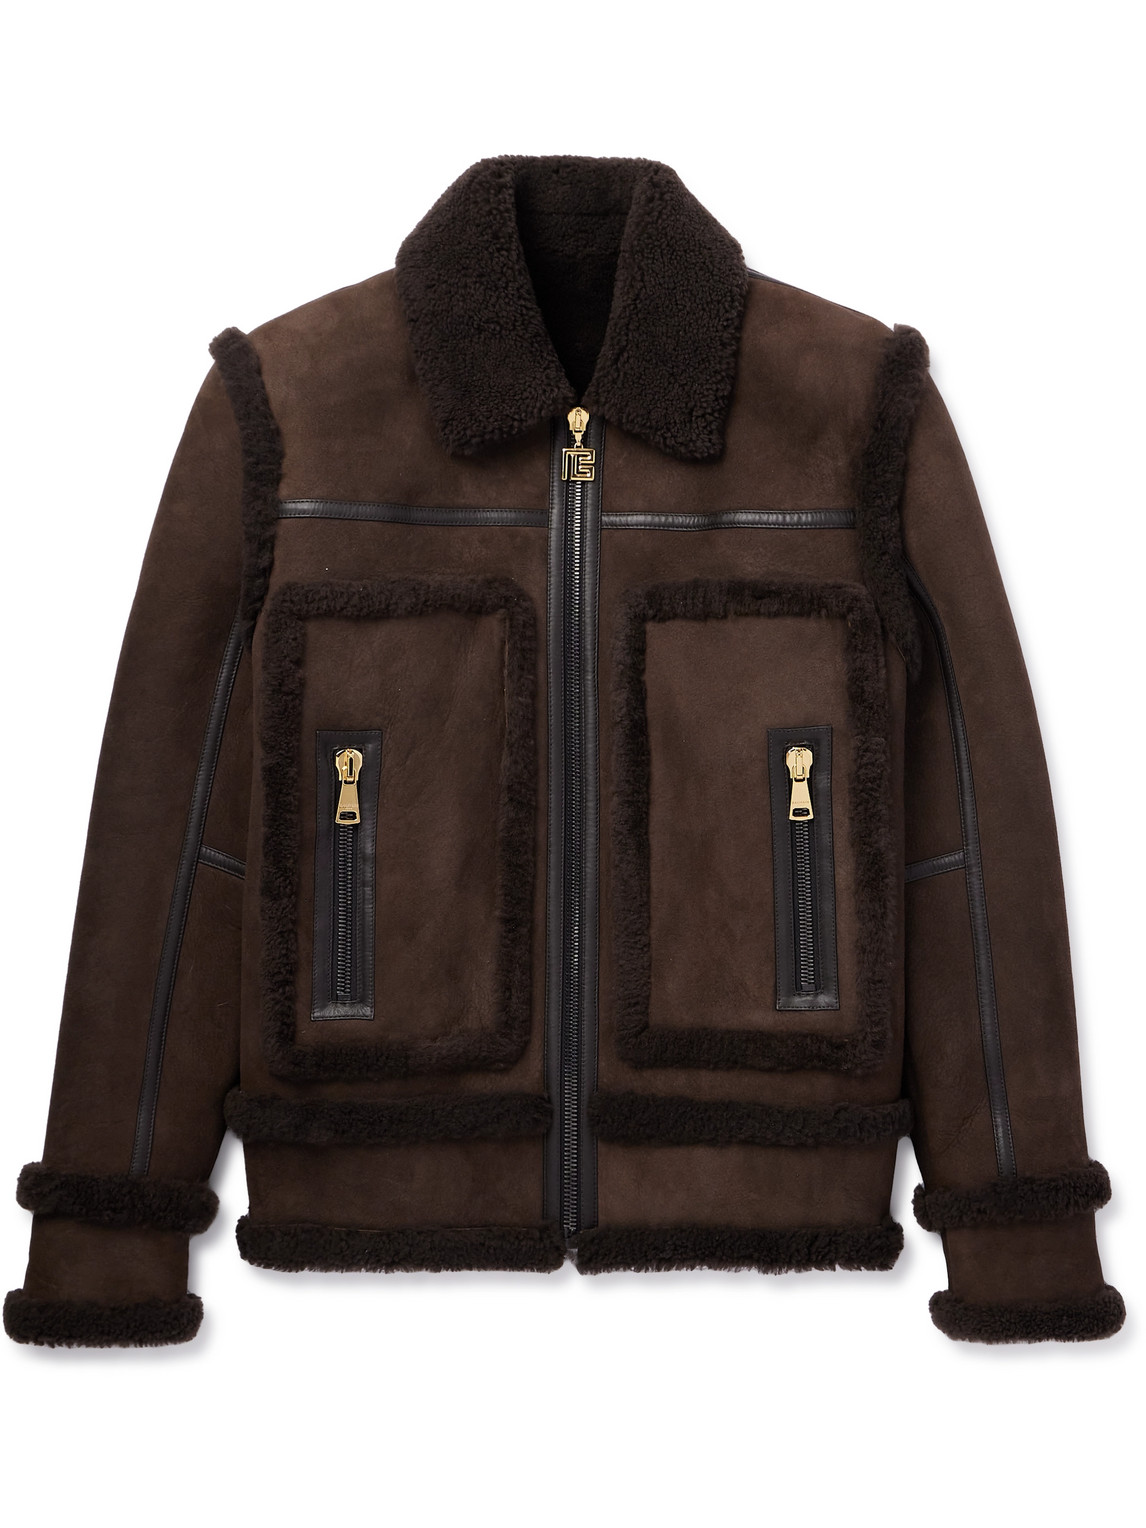 BALMAIN LEATHER-TRIMMED SHEARLING JACKET